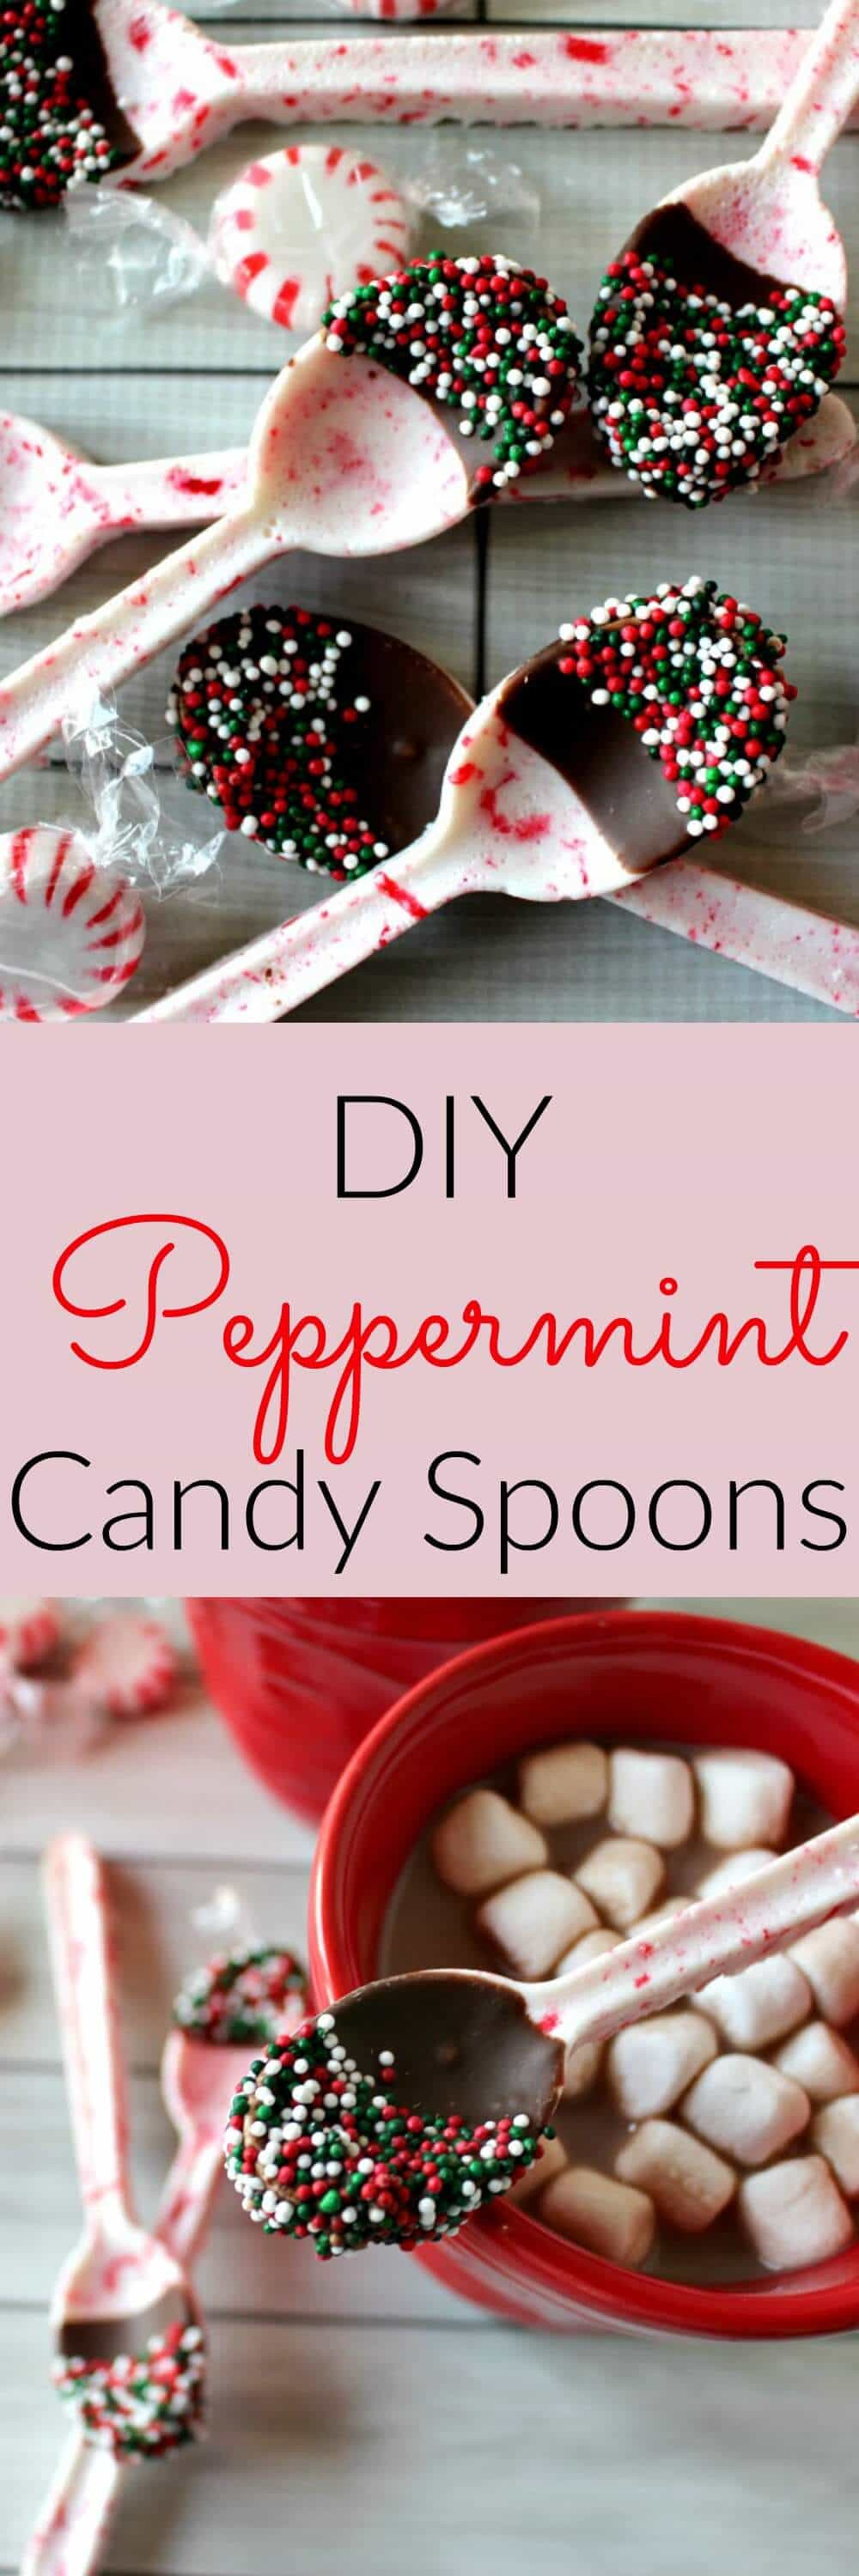 Cute DIY Christmas Gifts
 DIY Peppermint Candy Spoons Princess Pinky Girl